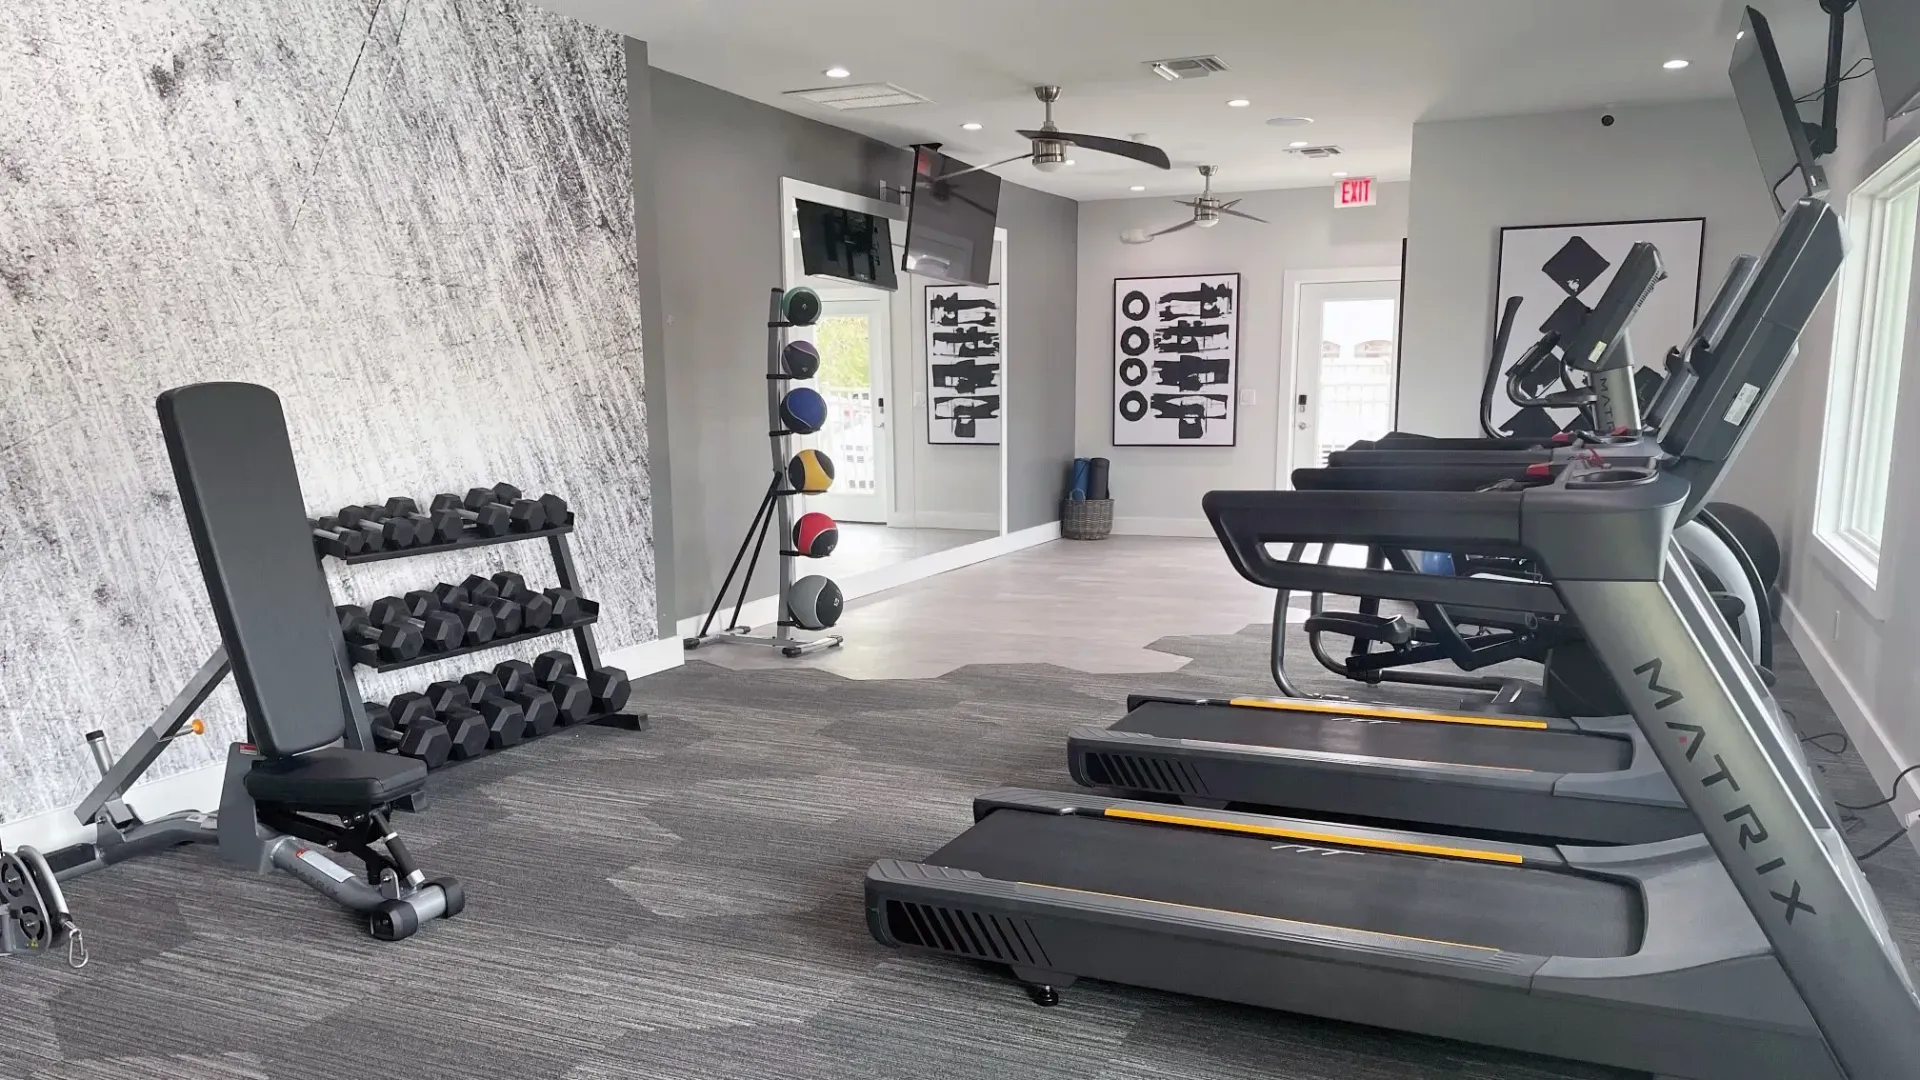 Modern fitness center with various workout equipment ranging from medicine balls to elliptical cardio machines.